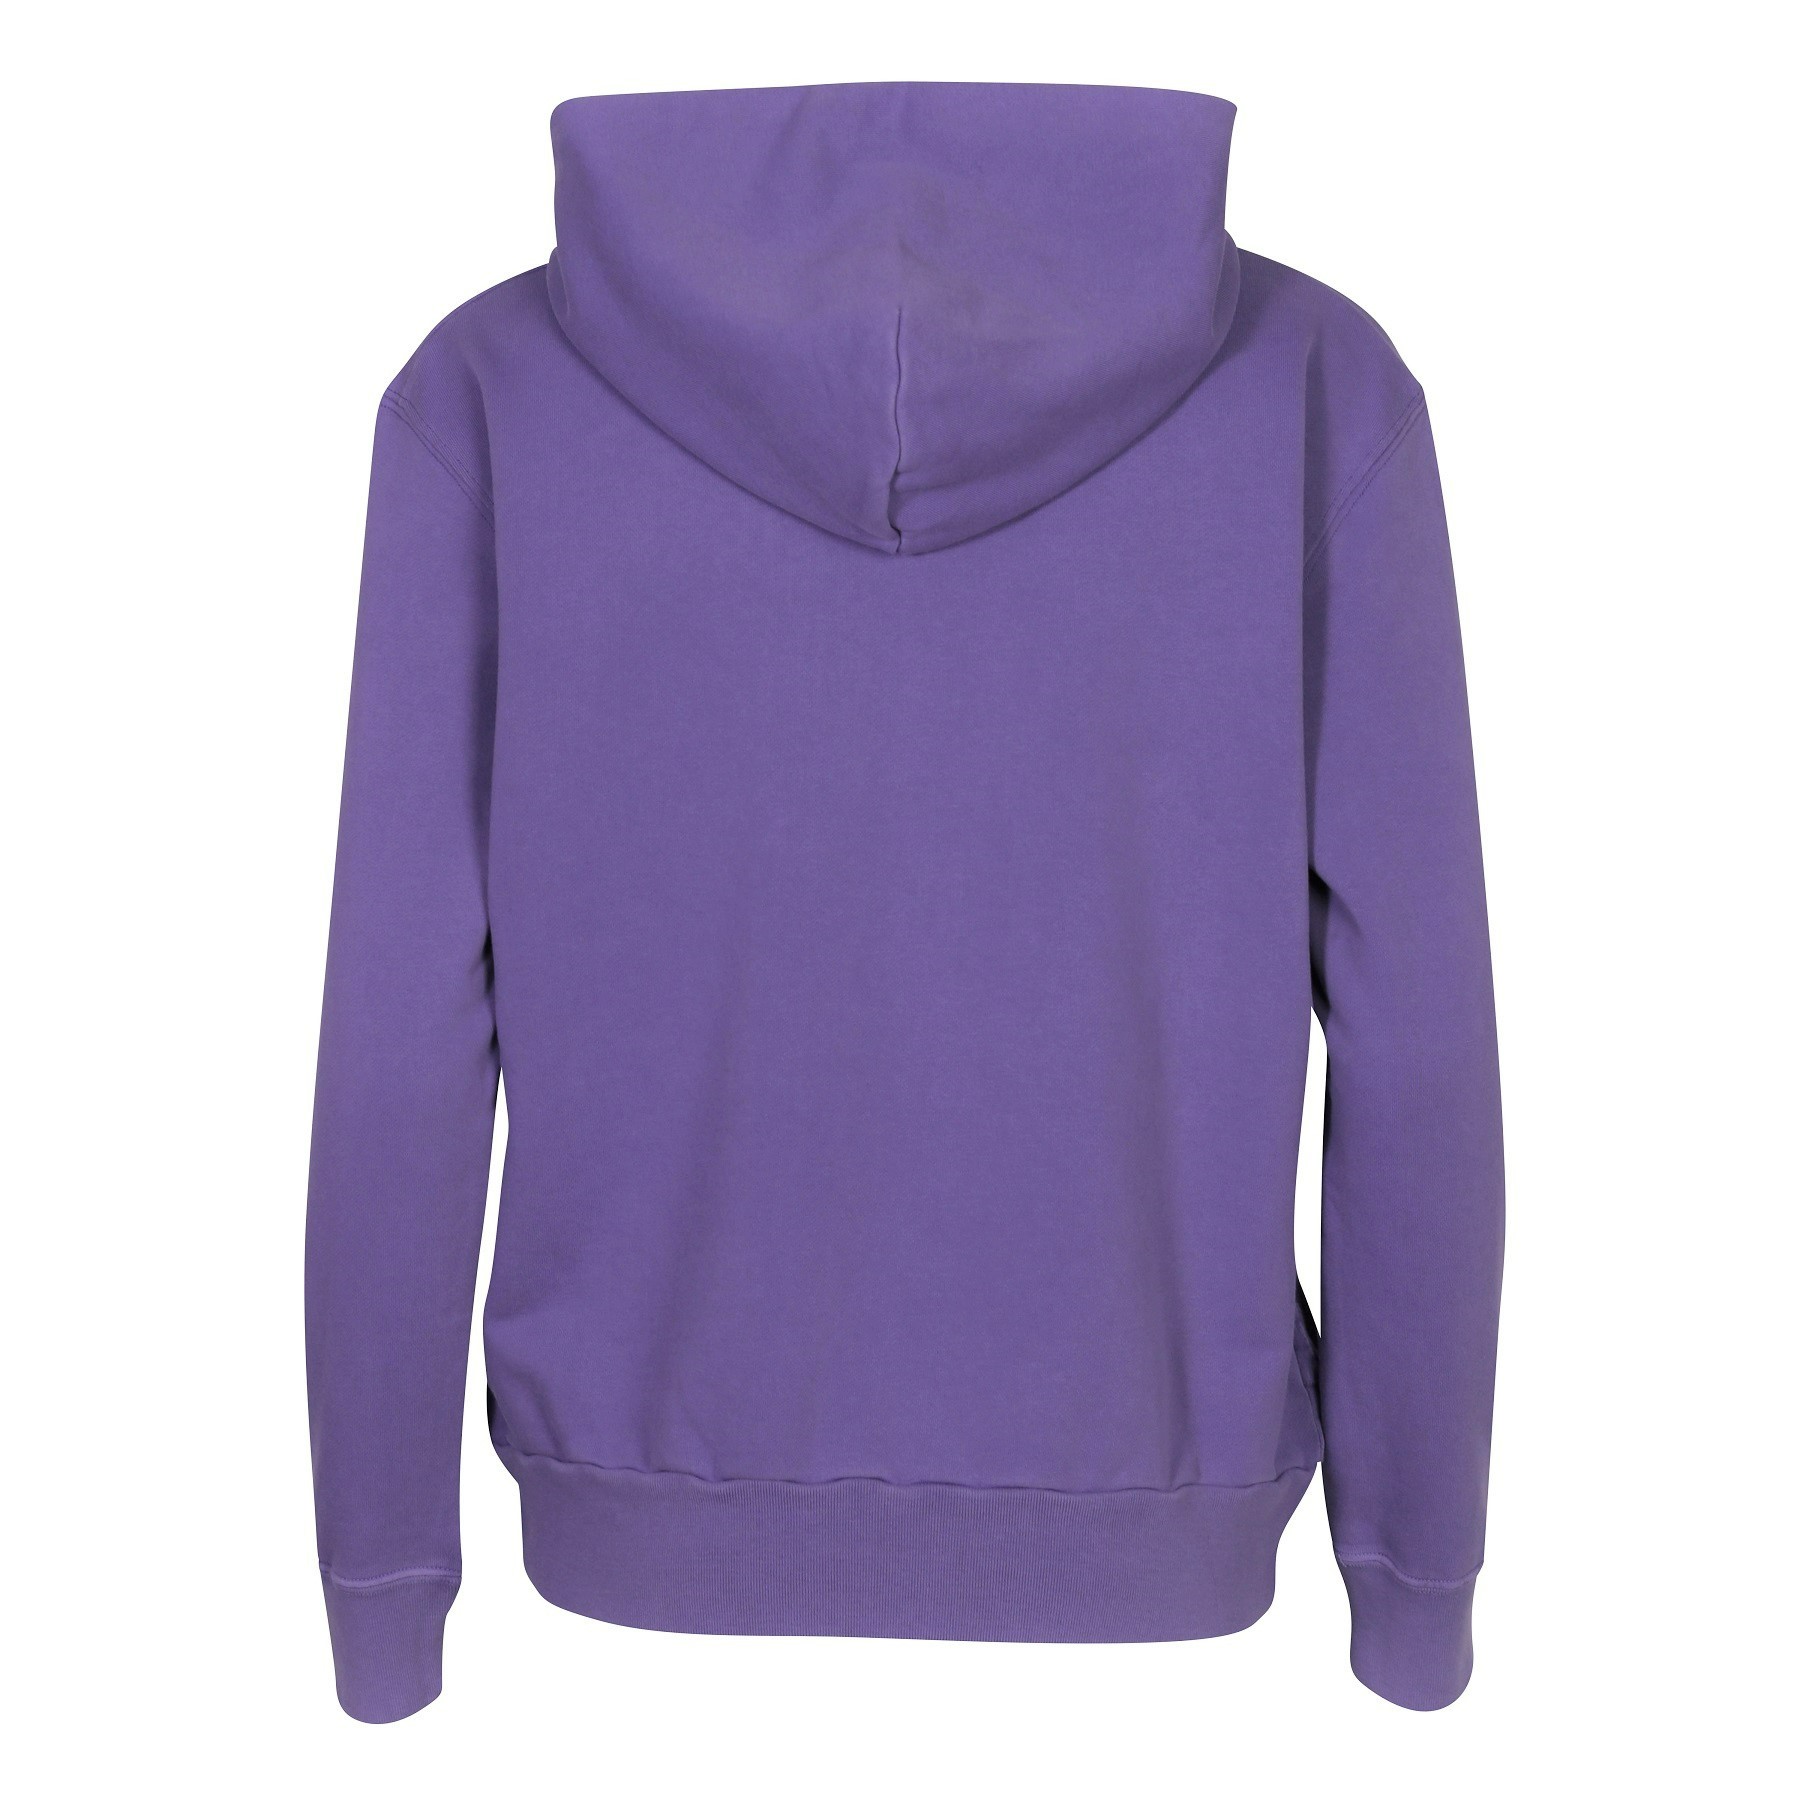 Autry Action Shoes Hoodie Supervintage in Tinto Lilac M